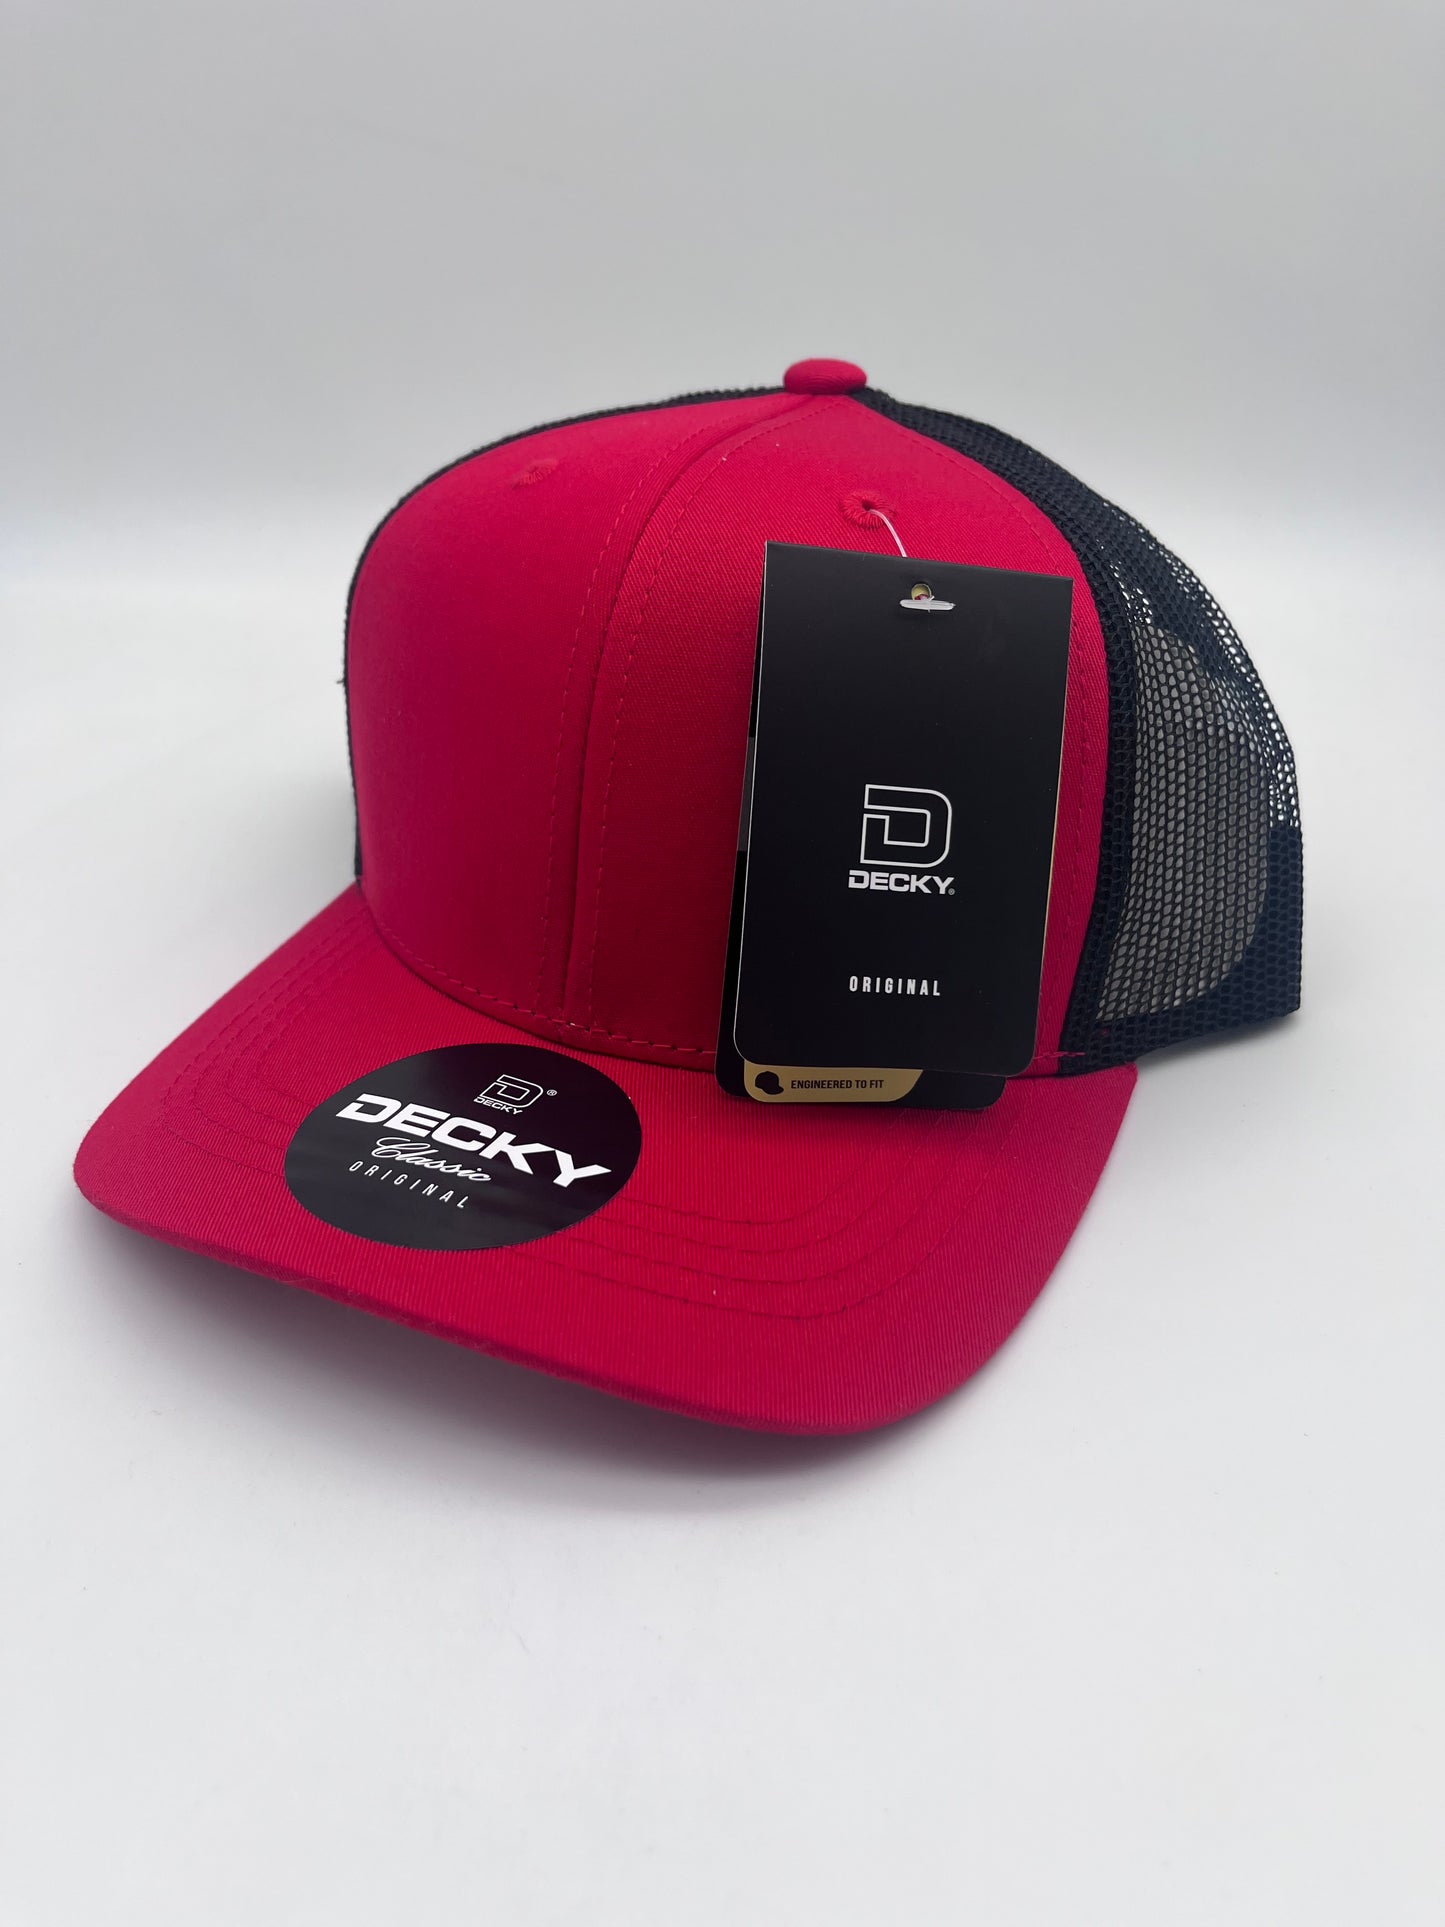 Red/Black Trucker Hat - Youth